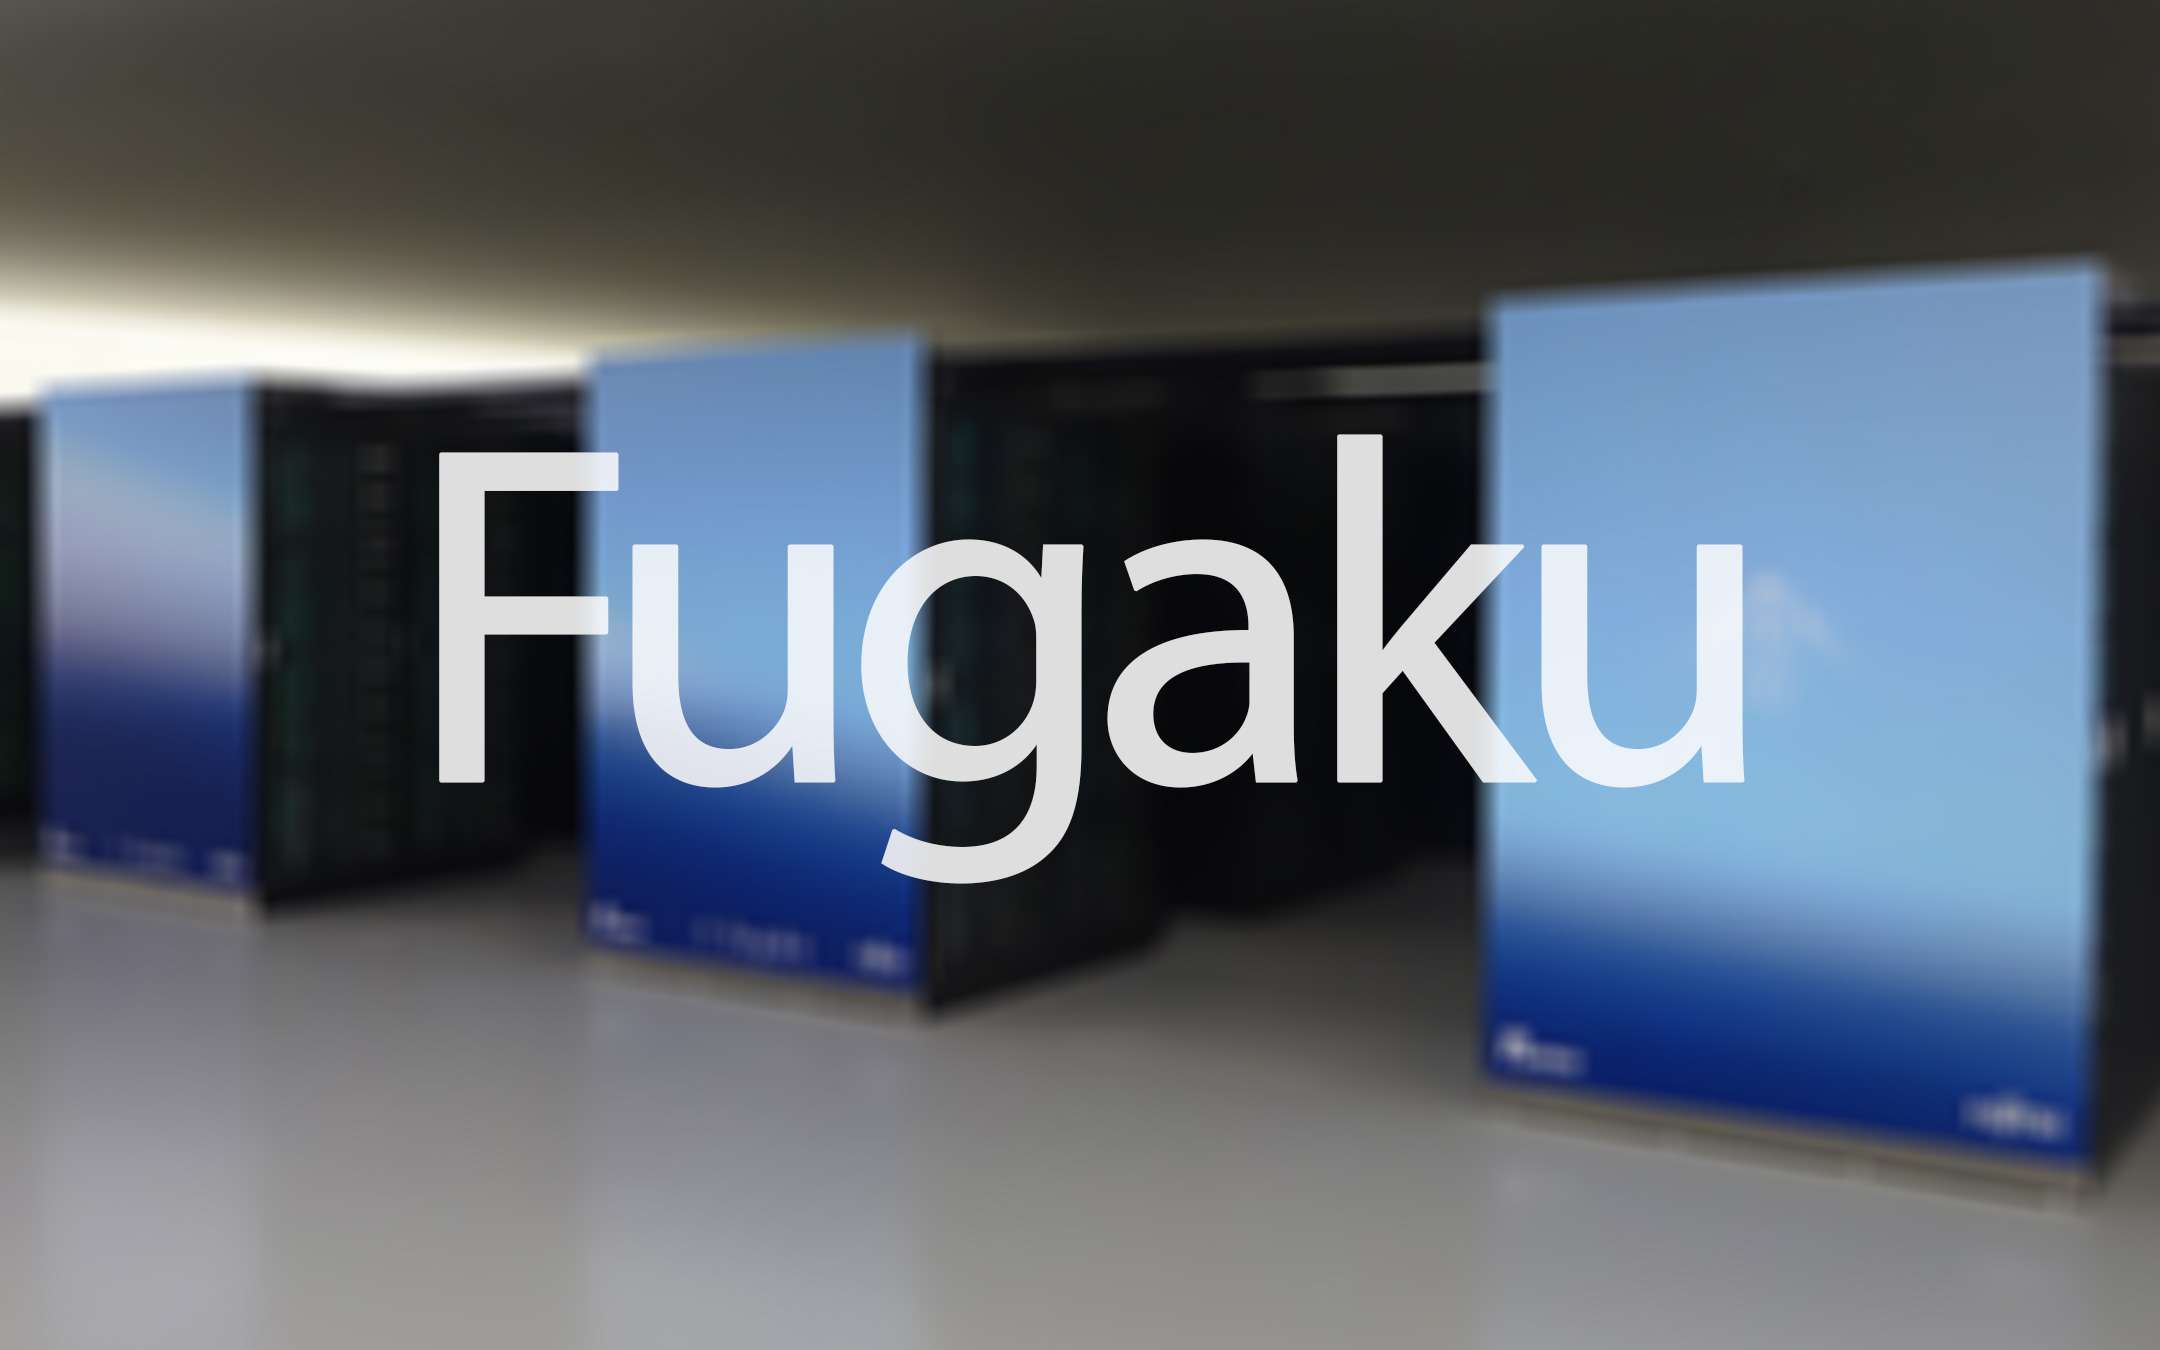 Fugaku: the most powerful supercomputer in the world is ARM